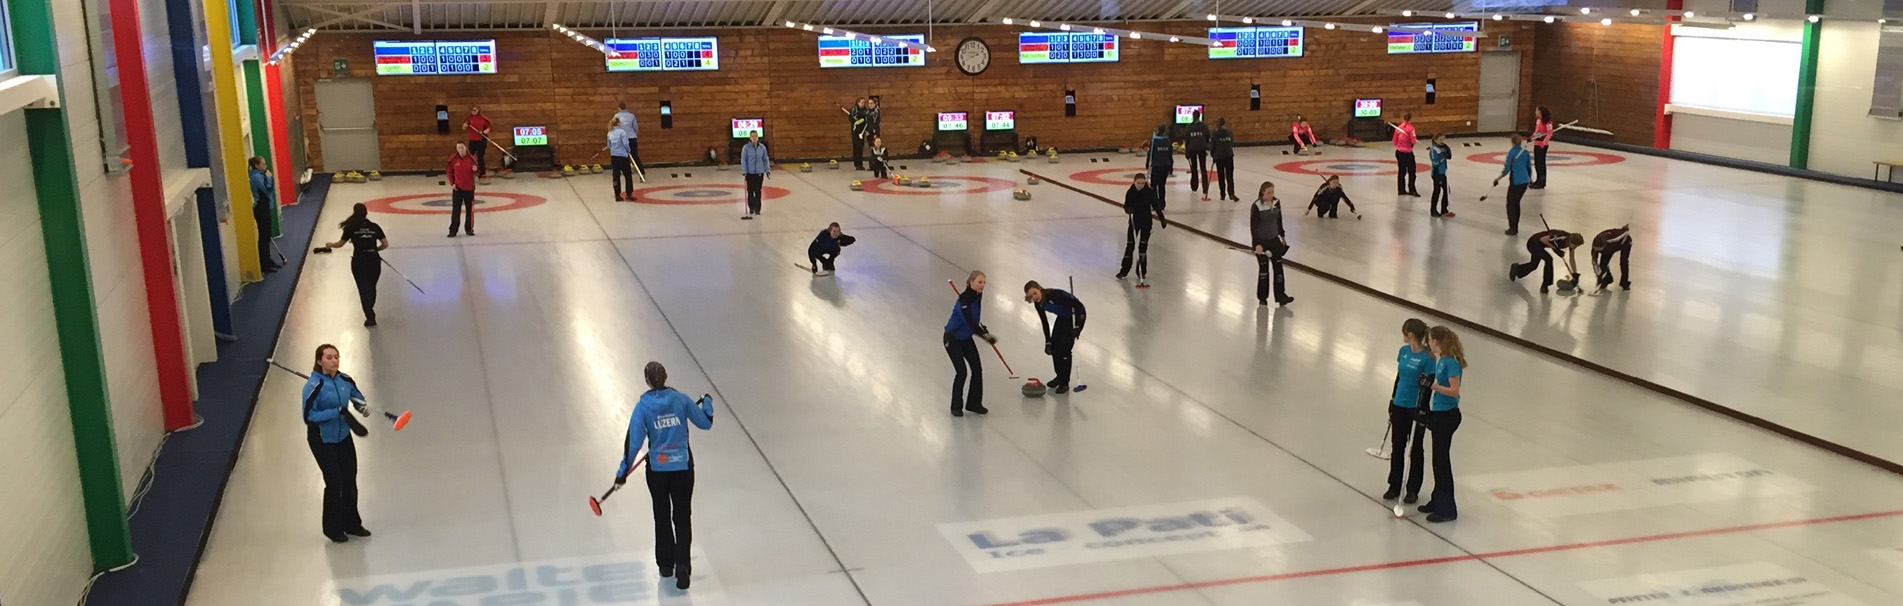 Discover curling